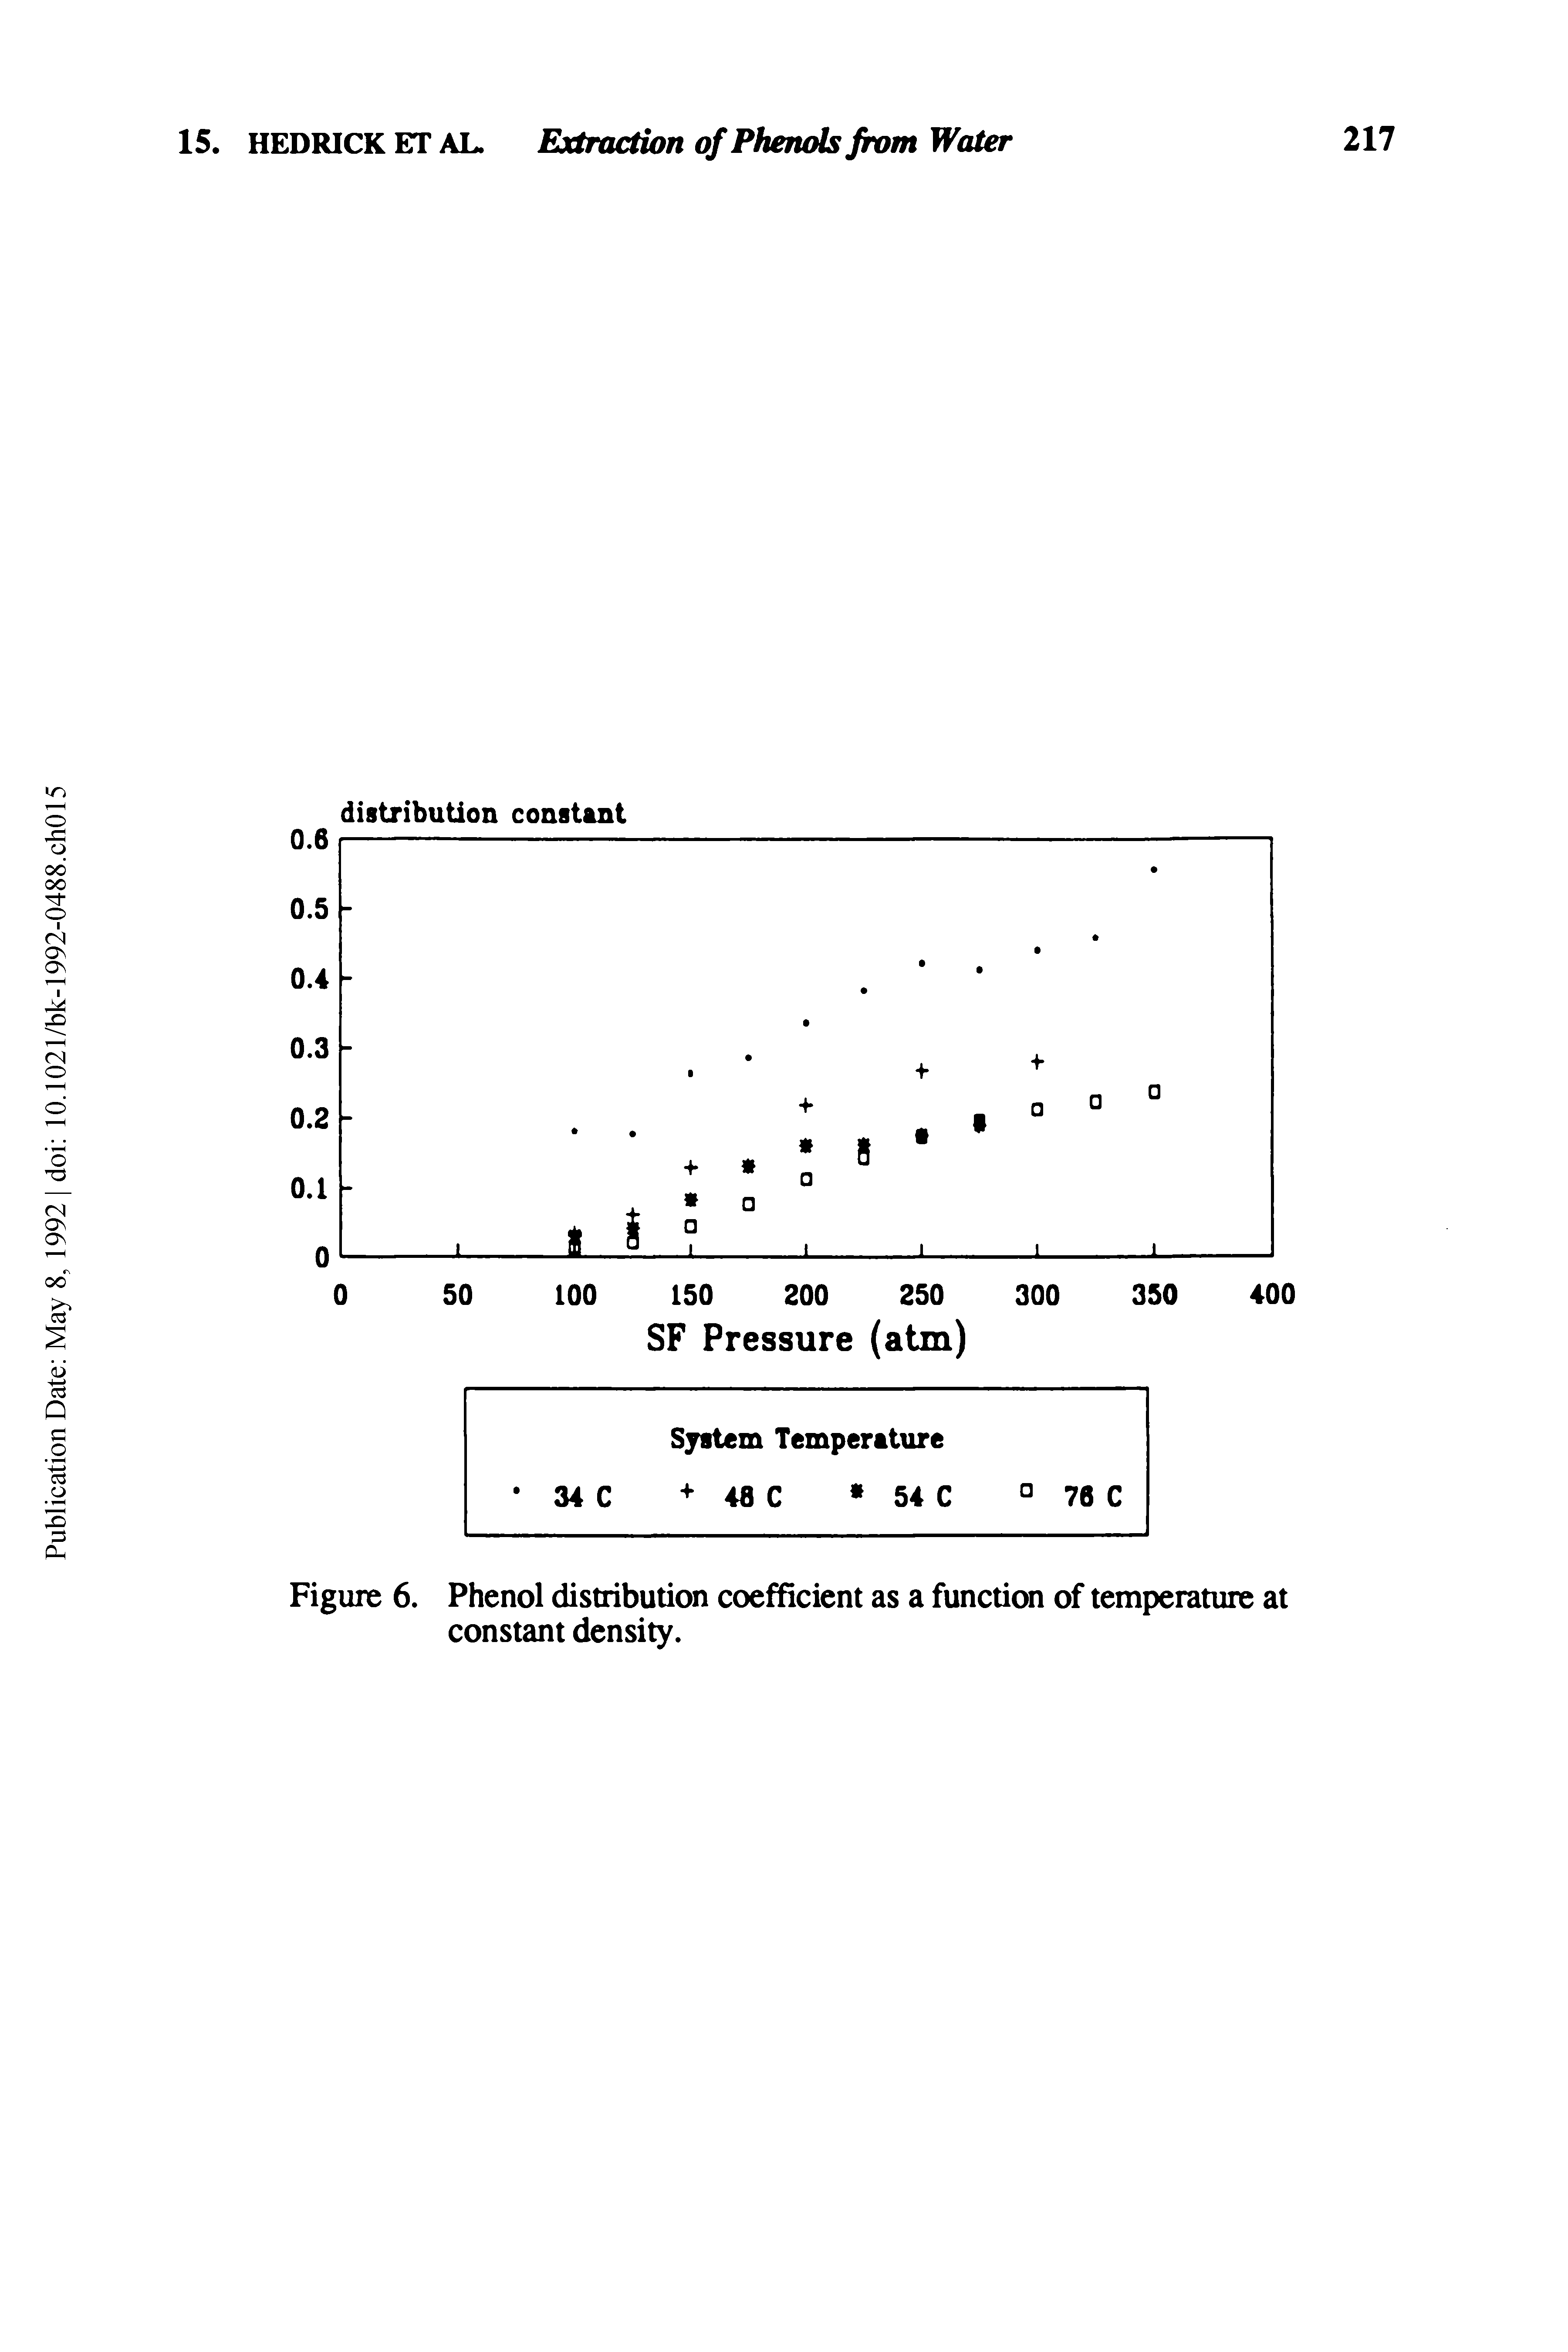 Figure 6. Phenol distribution coefficient as a function of temperature at constant density.